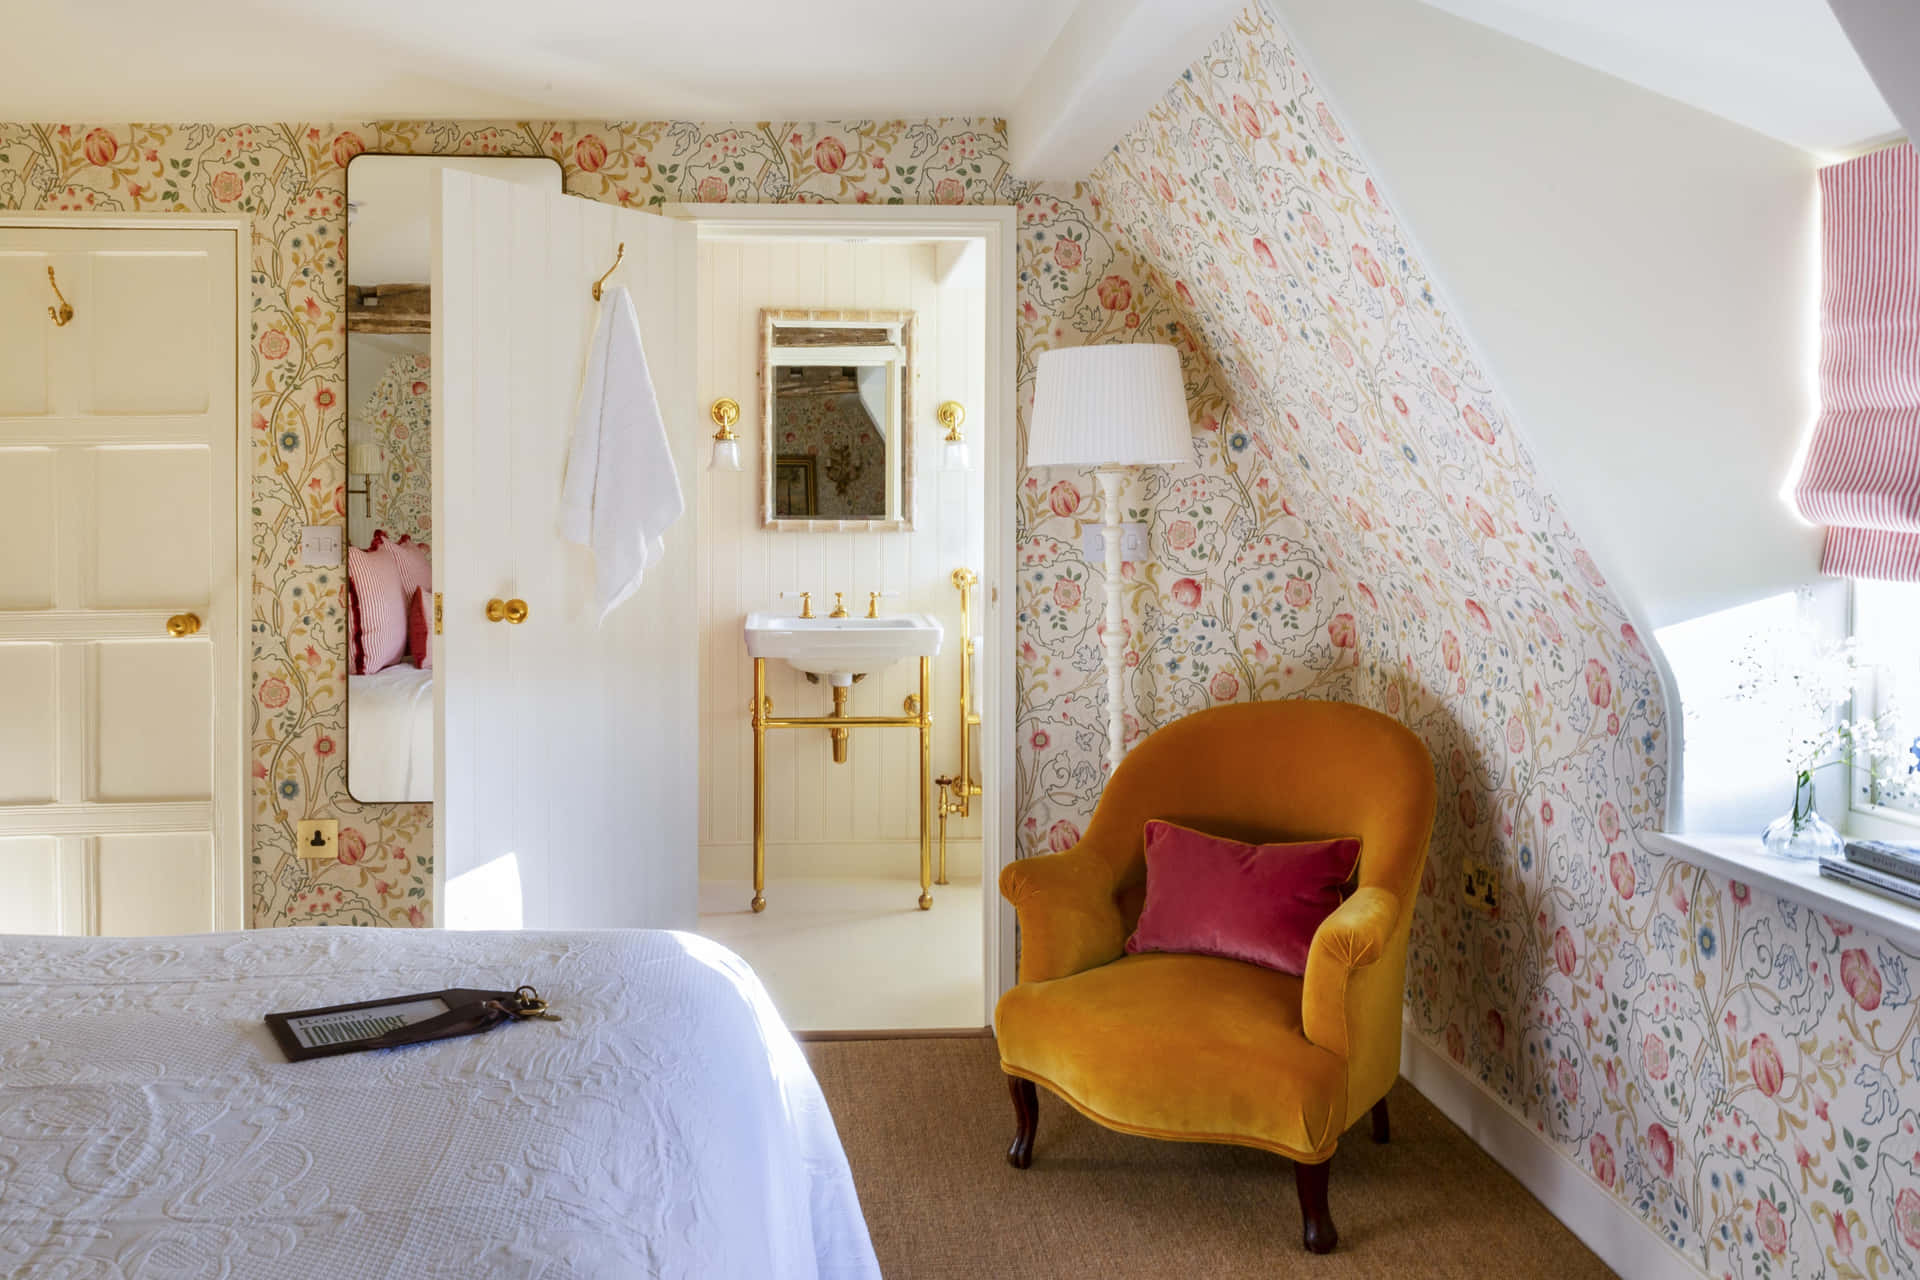 Elegant and Stylish Hotel Room Number One at Bruton Wallpaper